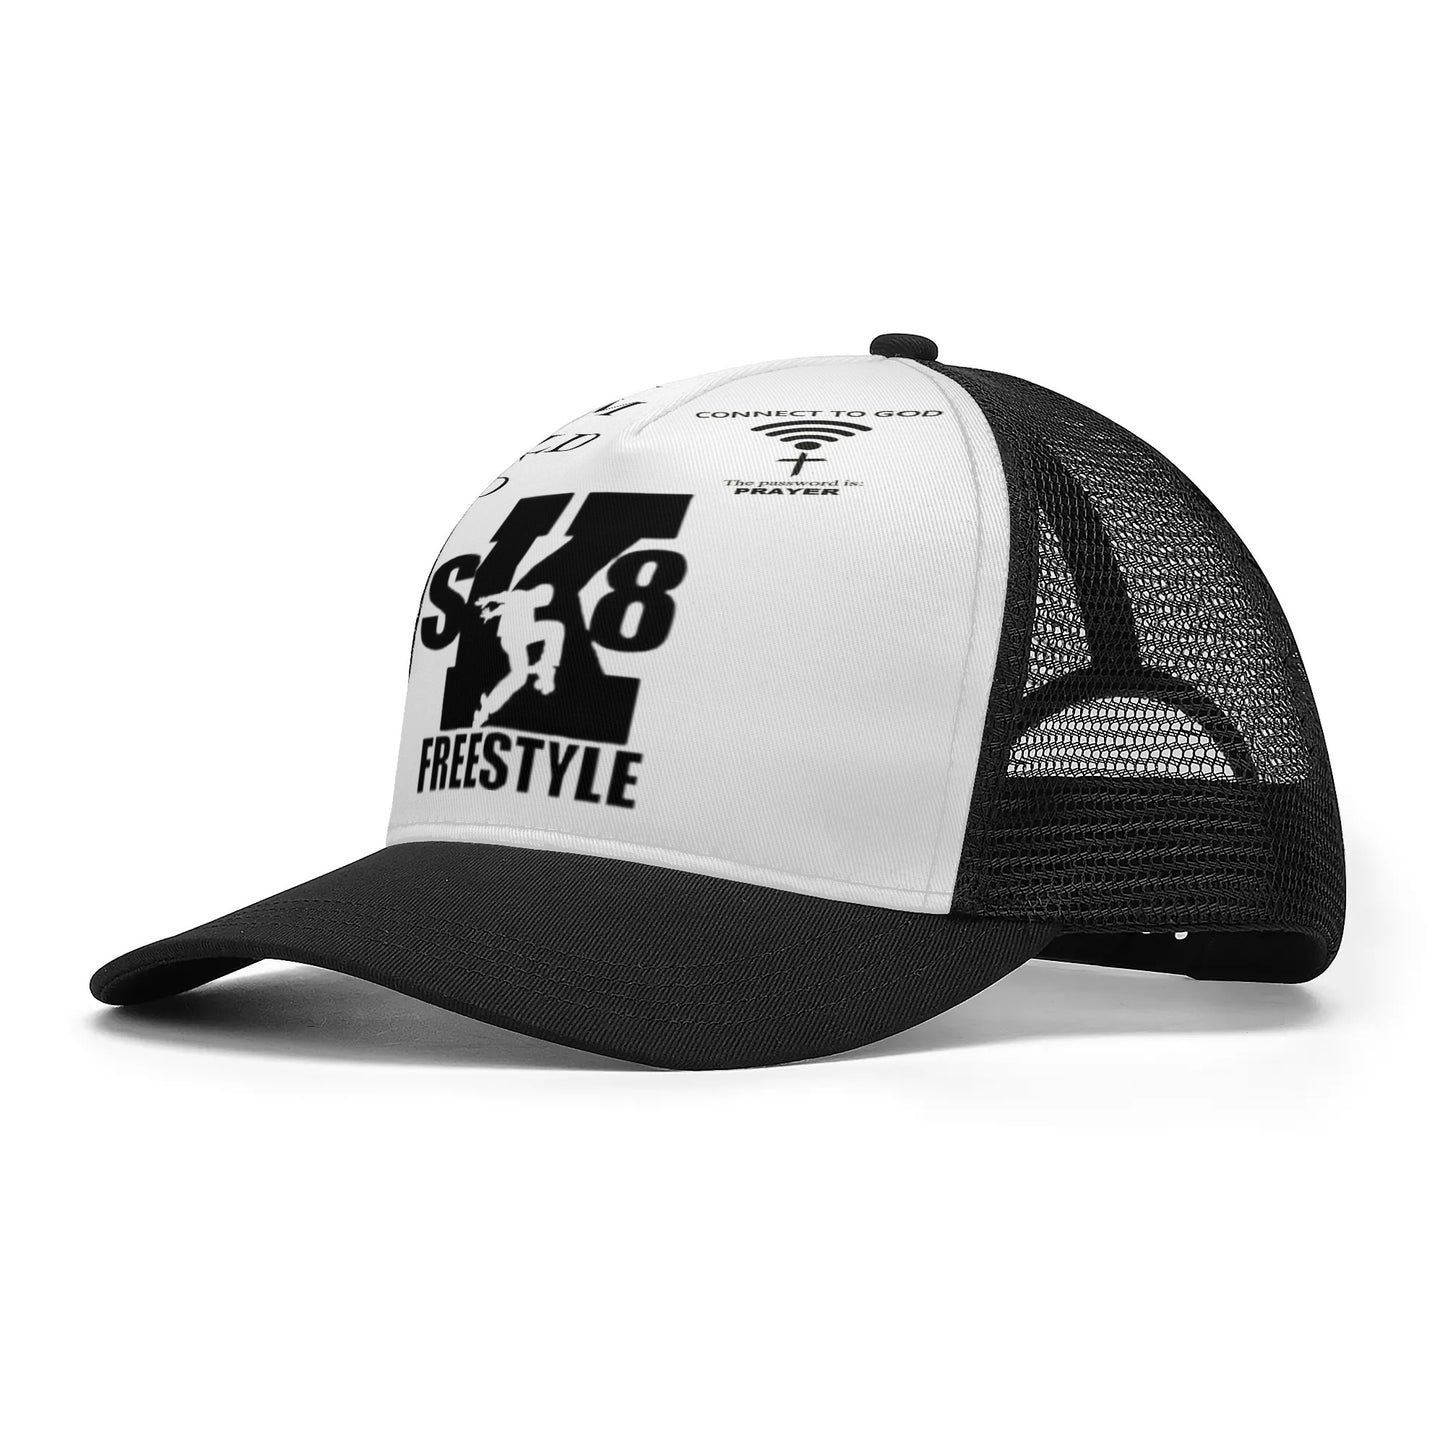 SK8 FreeStyle God Connected Mesh Trucker Hat